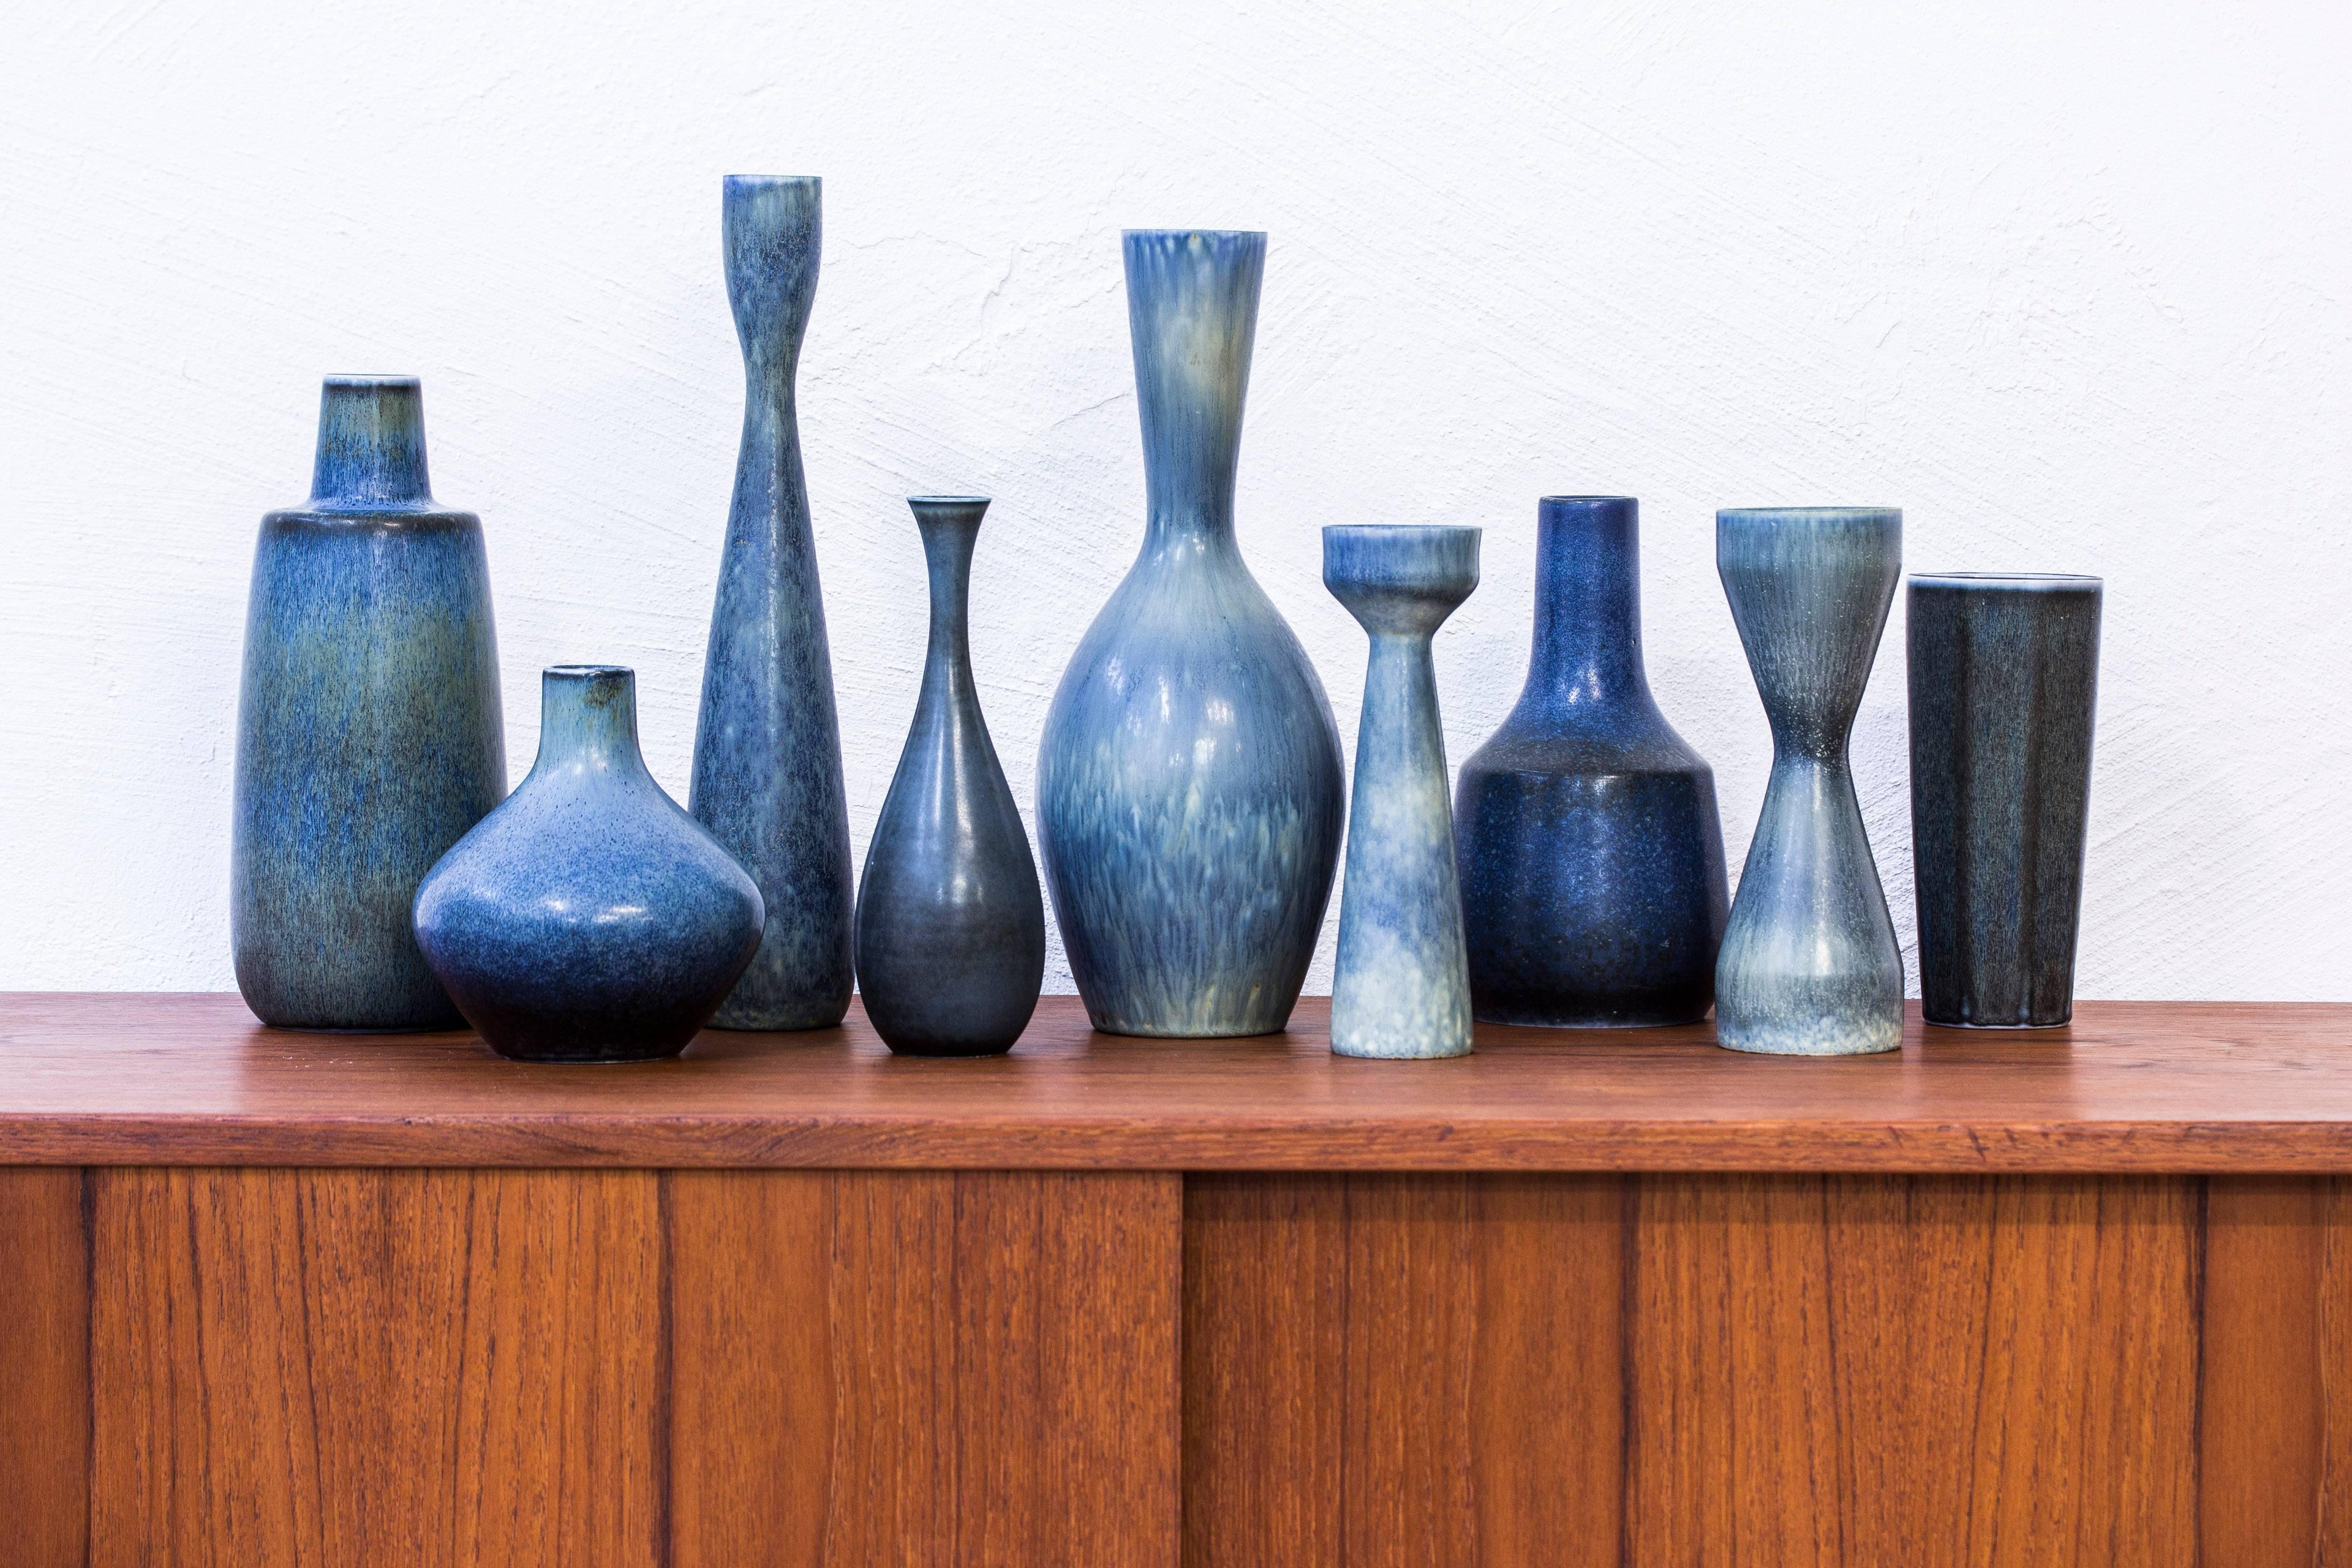 Collection of nine vases designed by Carl Harry Stålhane. Produced by Rörstrand during the 1950s. Made from stoneware with glazes in varying blue and green tones. All signed and all in excellent condition with light patina and age related wear.